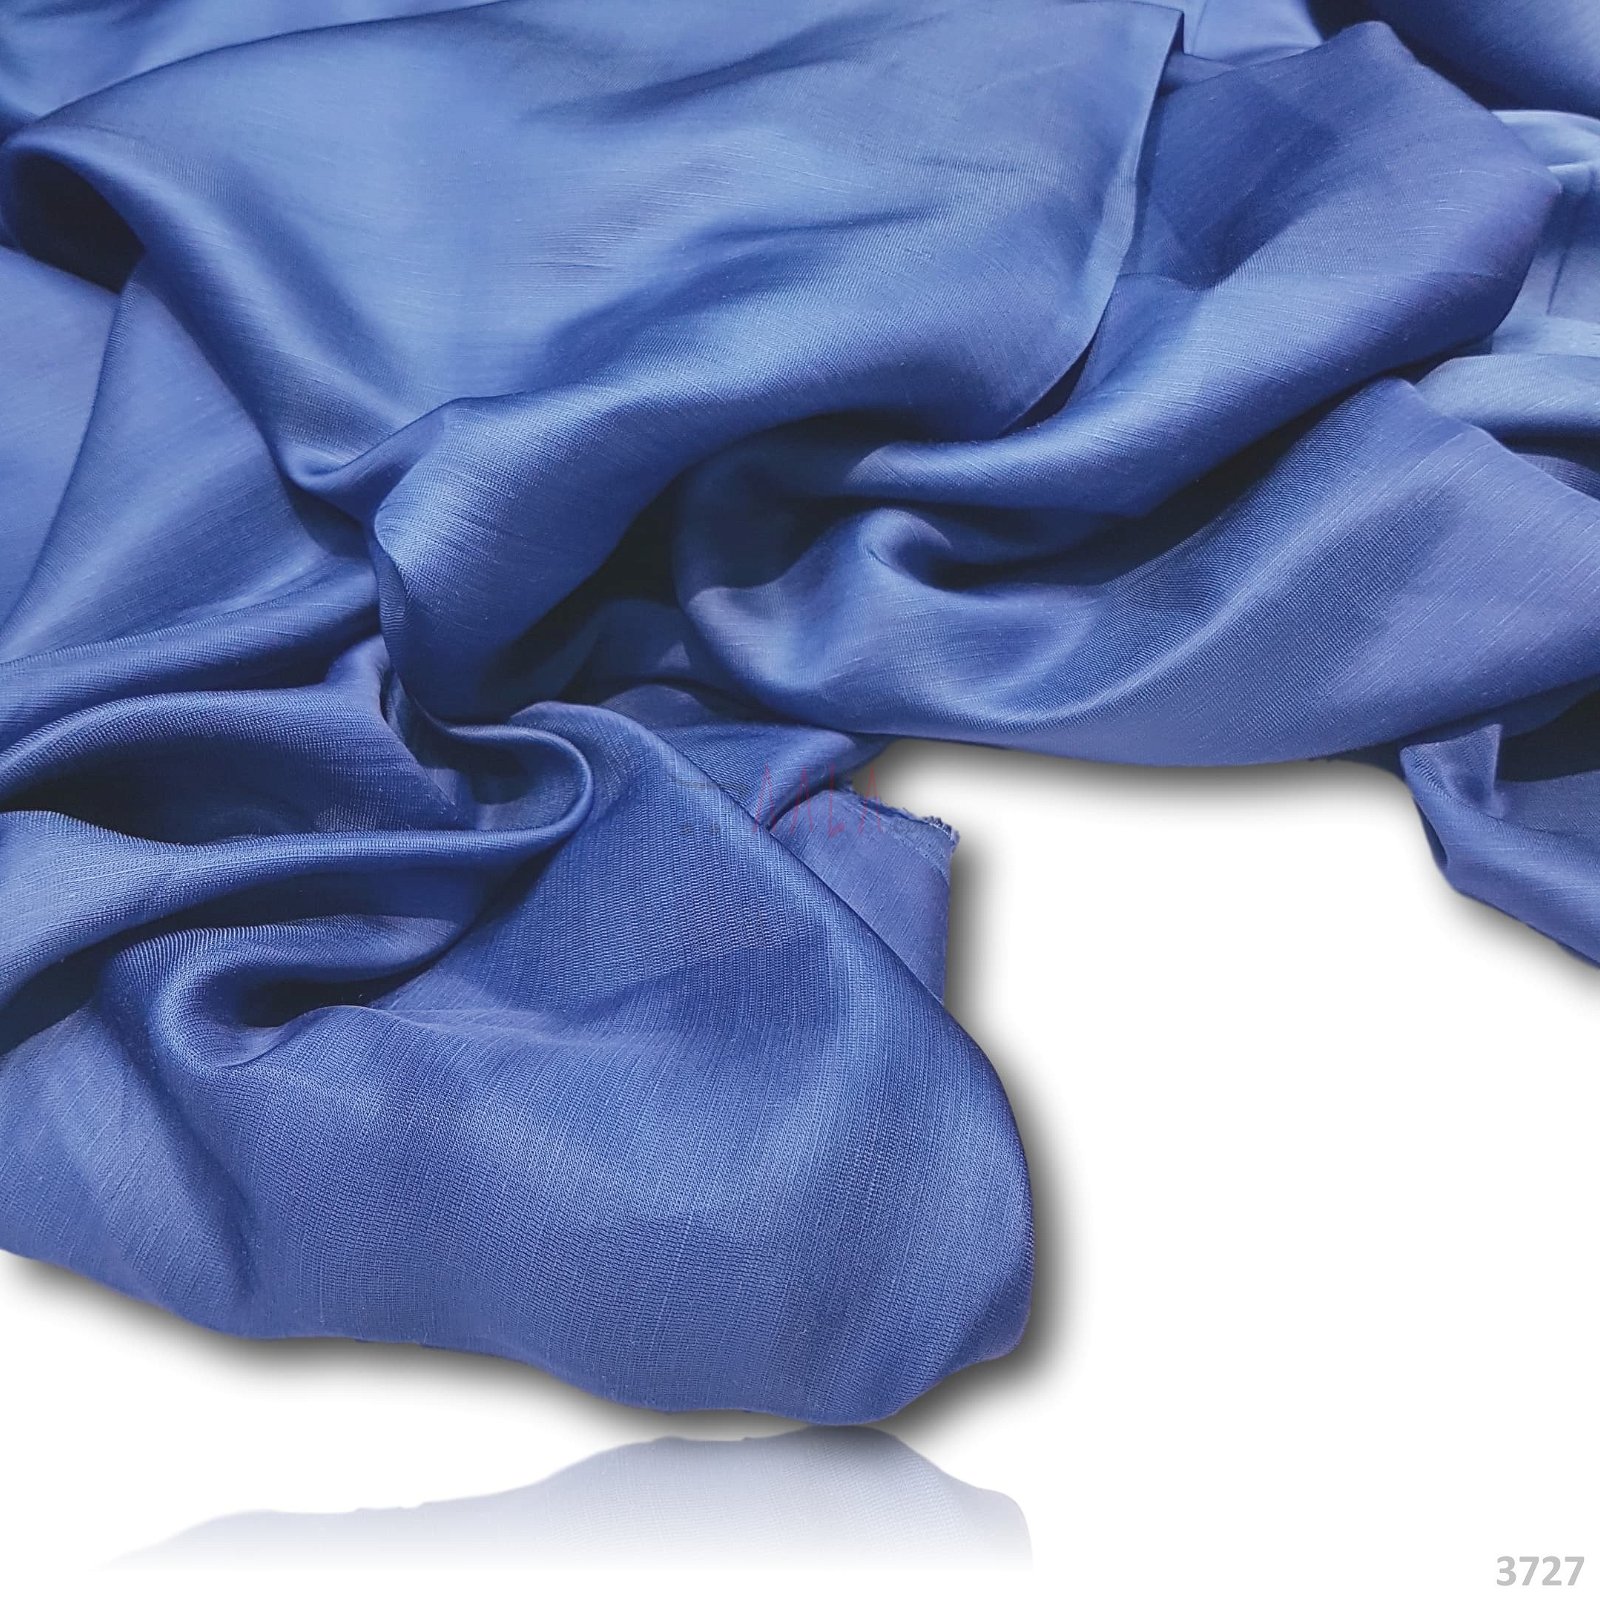 Linen Satin Viscose 44 Inches Dyed Per Metre #3727